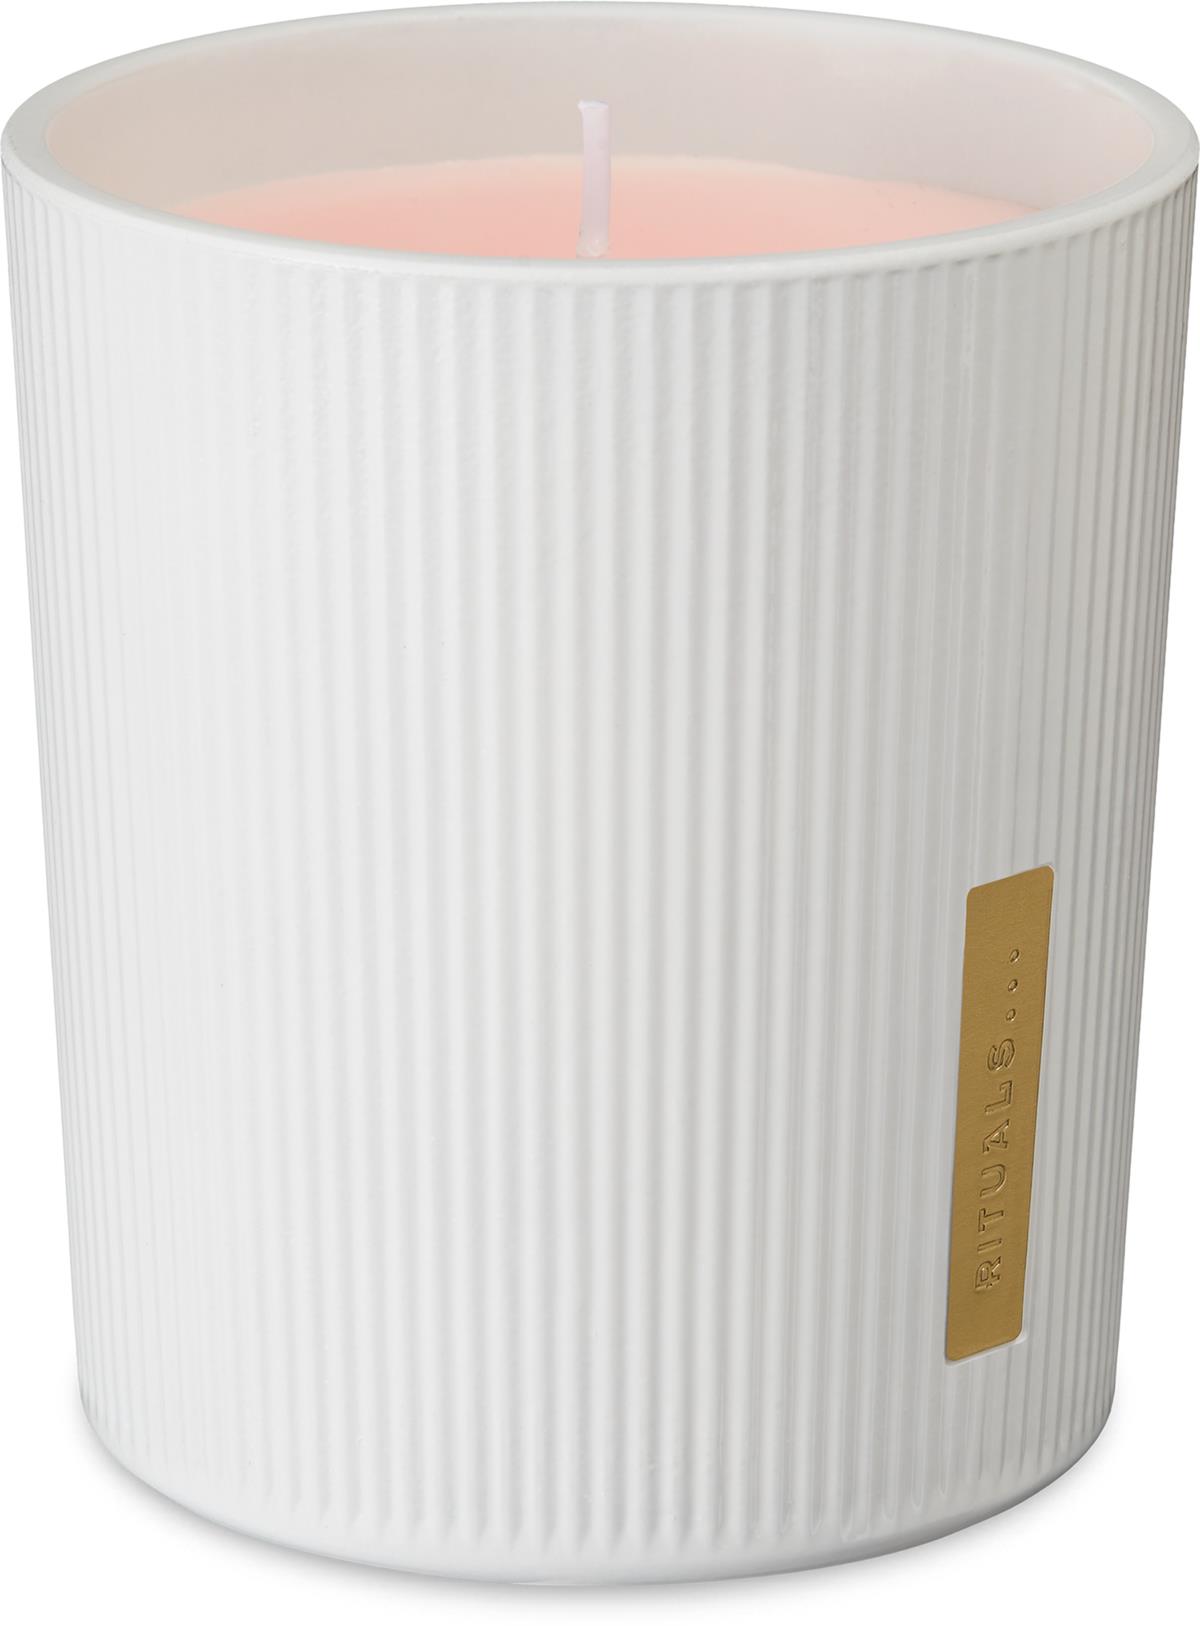 https://lyko.com/globalassets/product-images/rituals-the-ritual-of-sakura-scented-candle-1808-708-0290_1.jpg?ref=149E59686A&w=1200&h=1626&quality=75